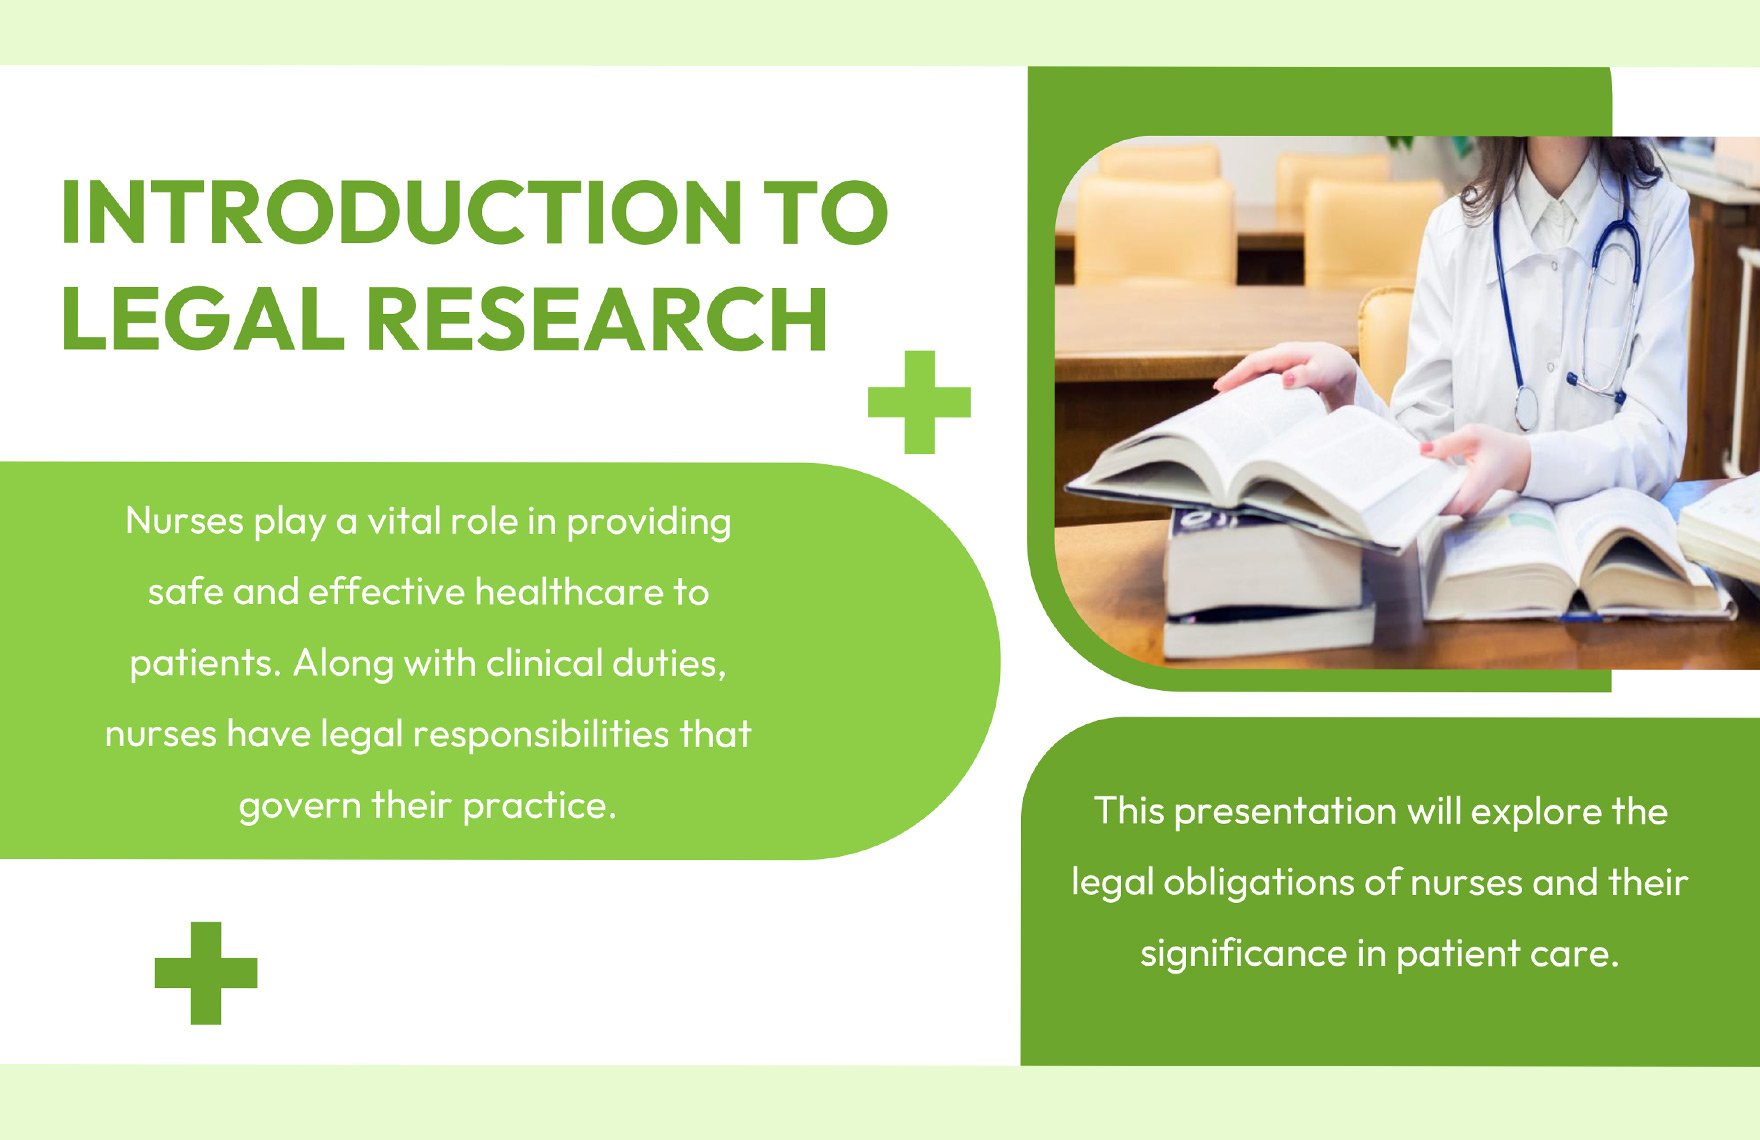 Legal Responsibility of Nurse PPT Template